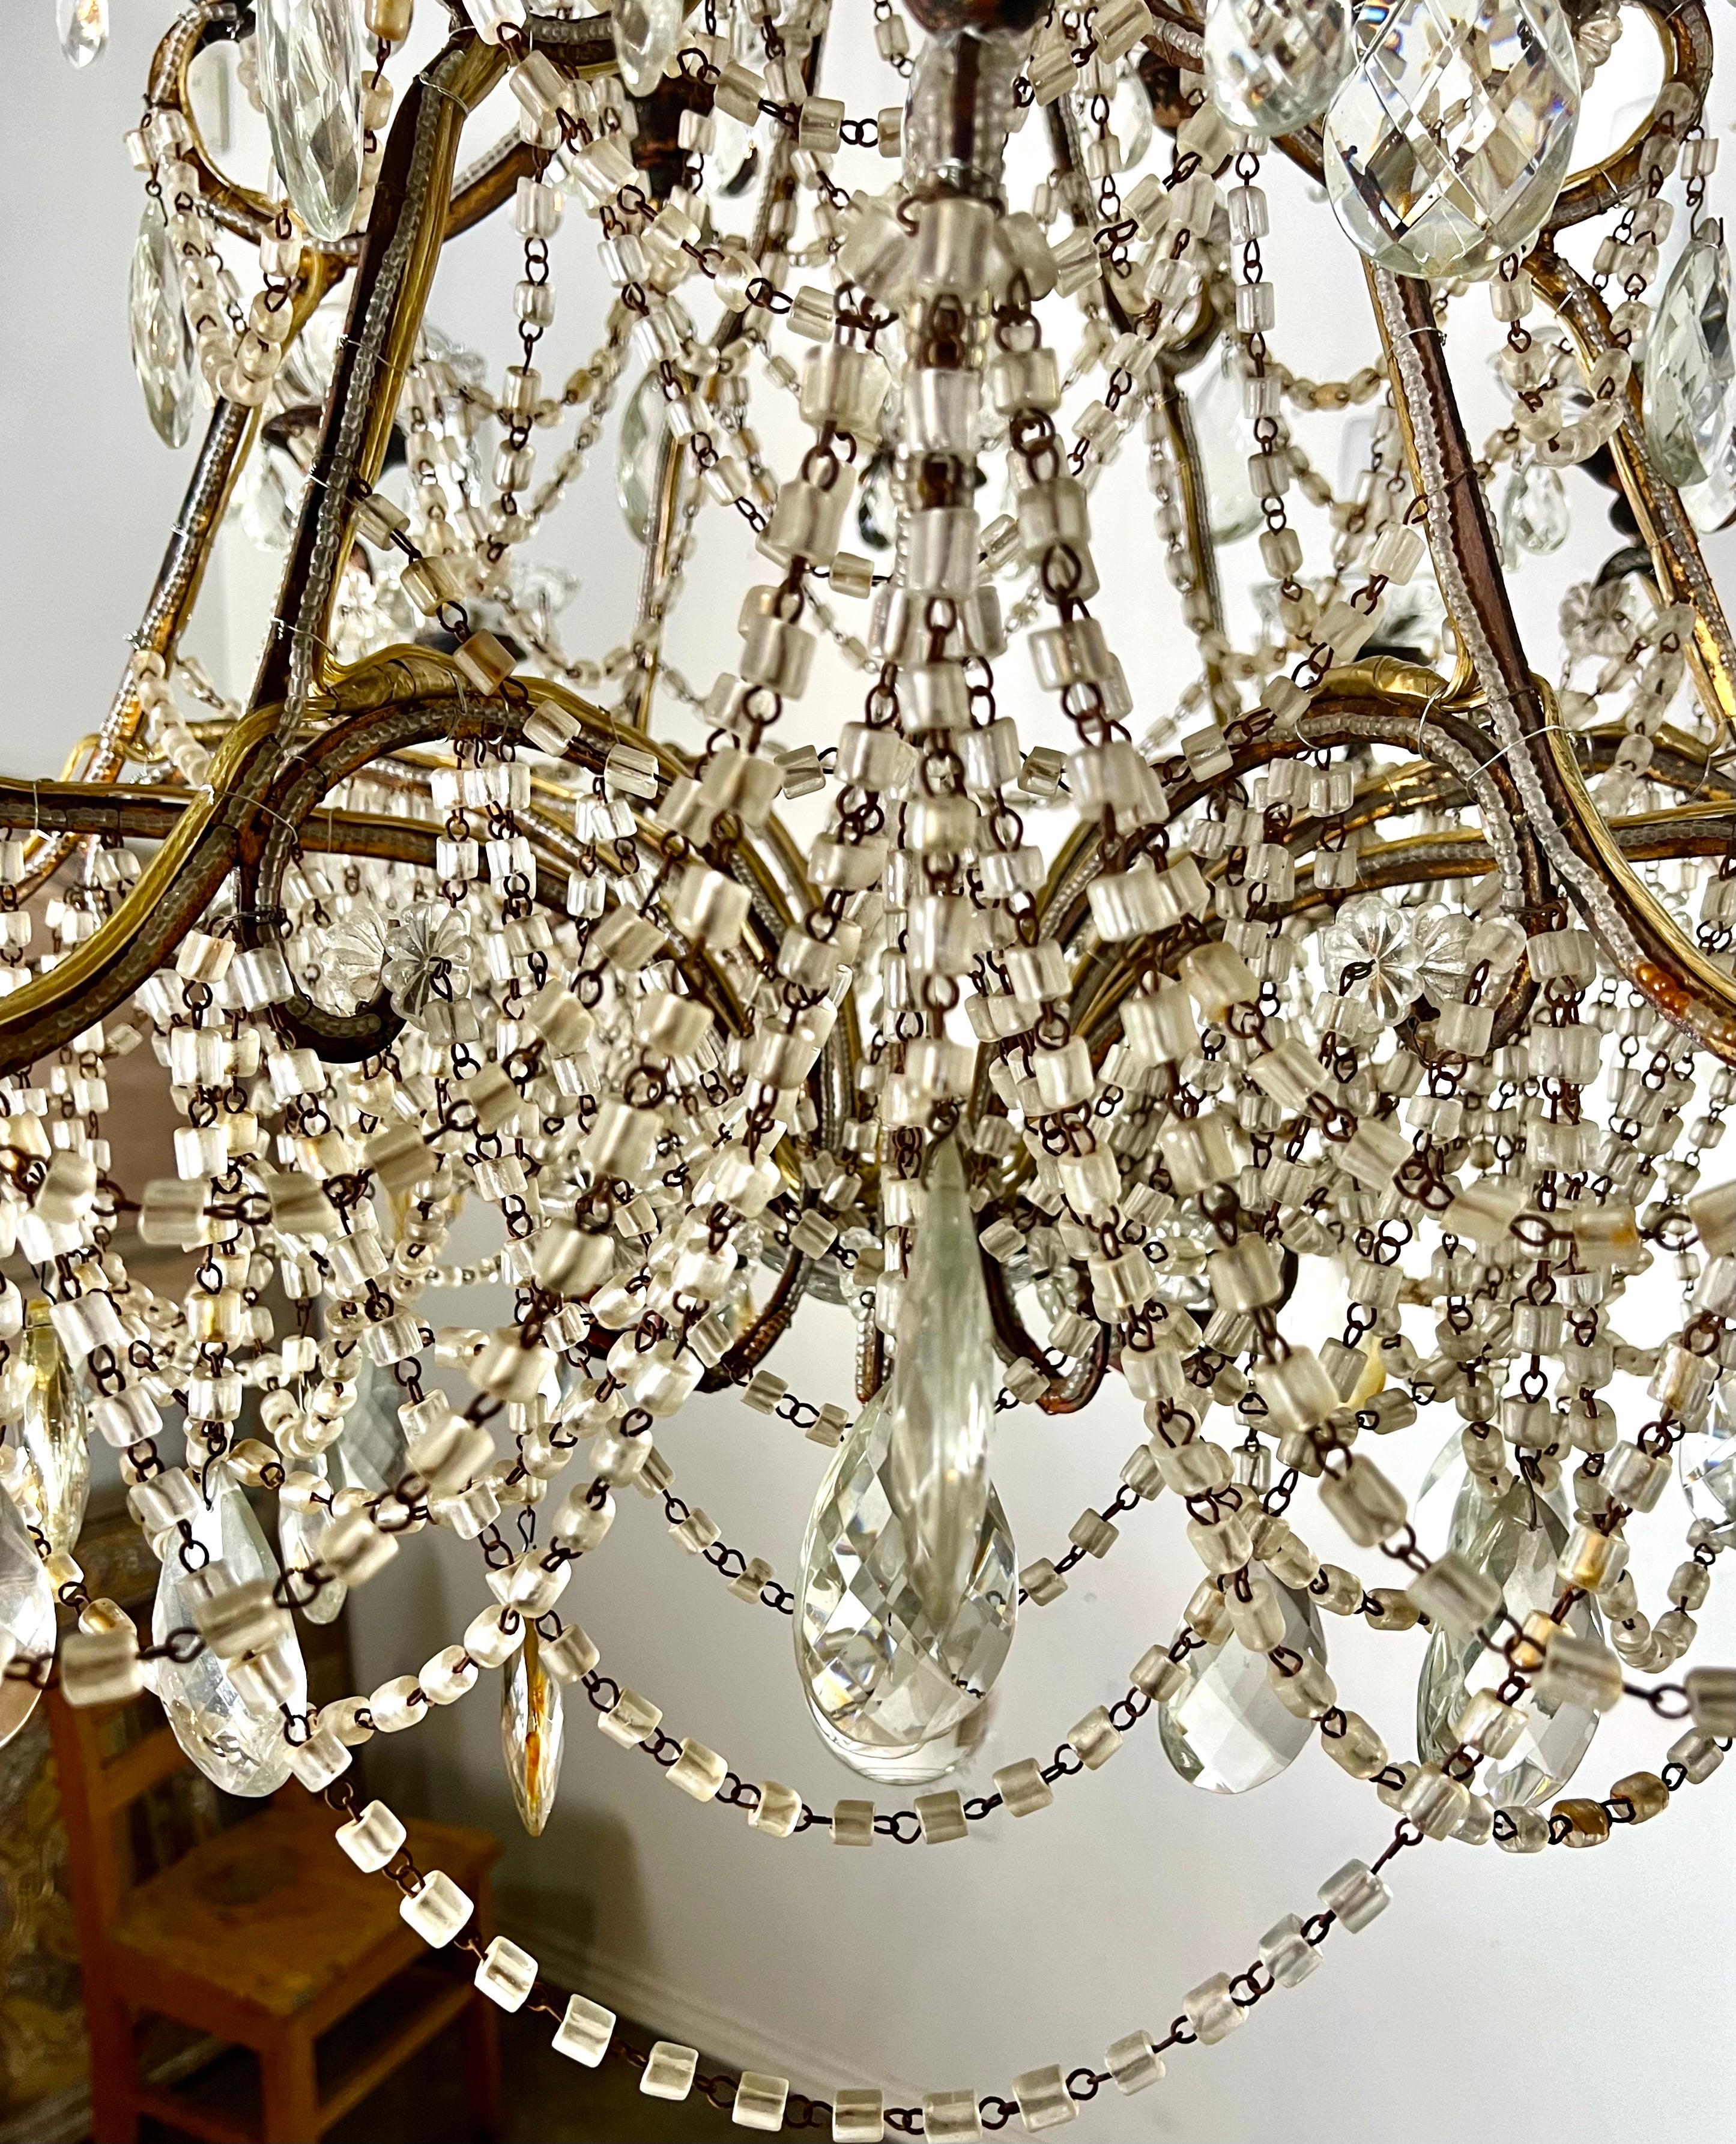 Monumental French ornate chandelier featuring (18) lights with drip wax candle covers.  The design is elaborate and detailed, featuring macaroni style beads and almond shaped crystal.    The opulence and grandeur was typical of the Rococo period. 